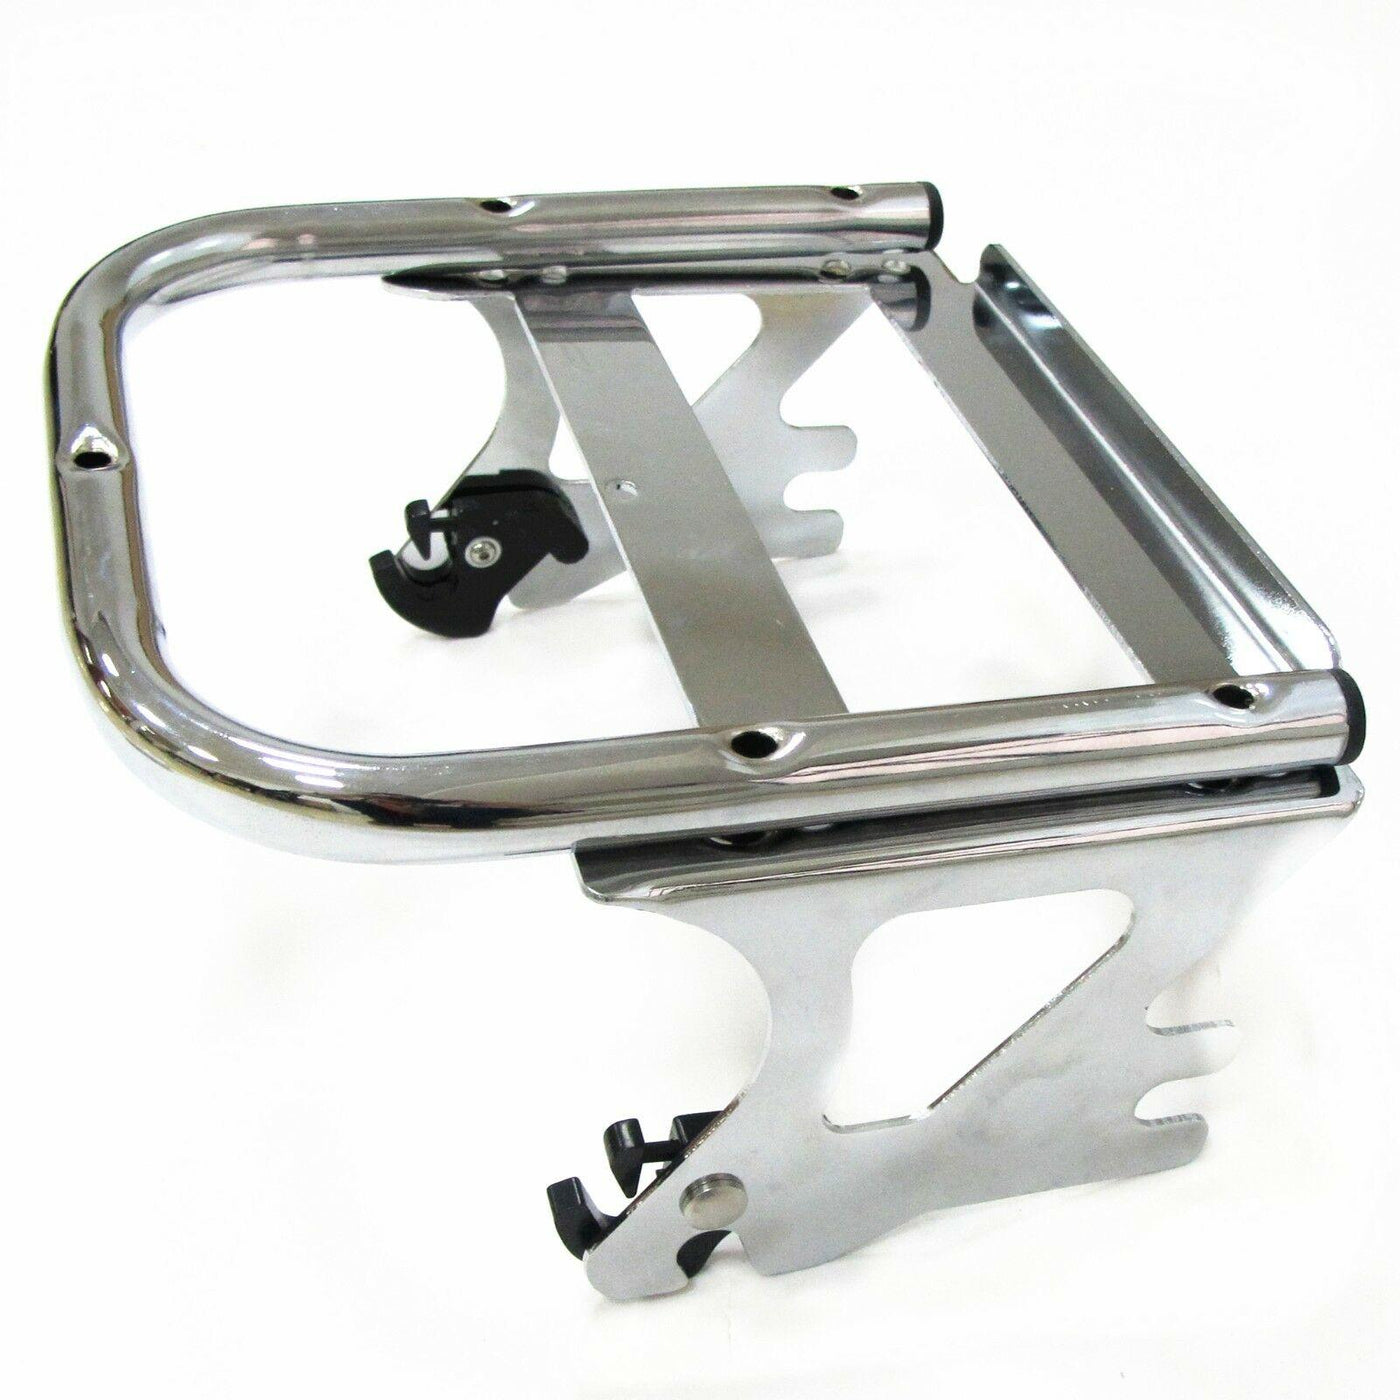 Painted Chopped Tour Pack Pak W/ Luggage Rack For Harley Davidson 97-08 Touring - Moto Life Products